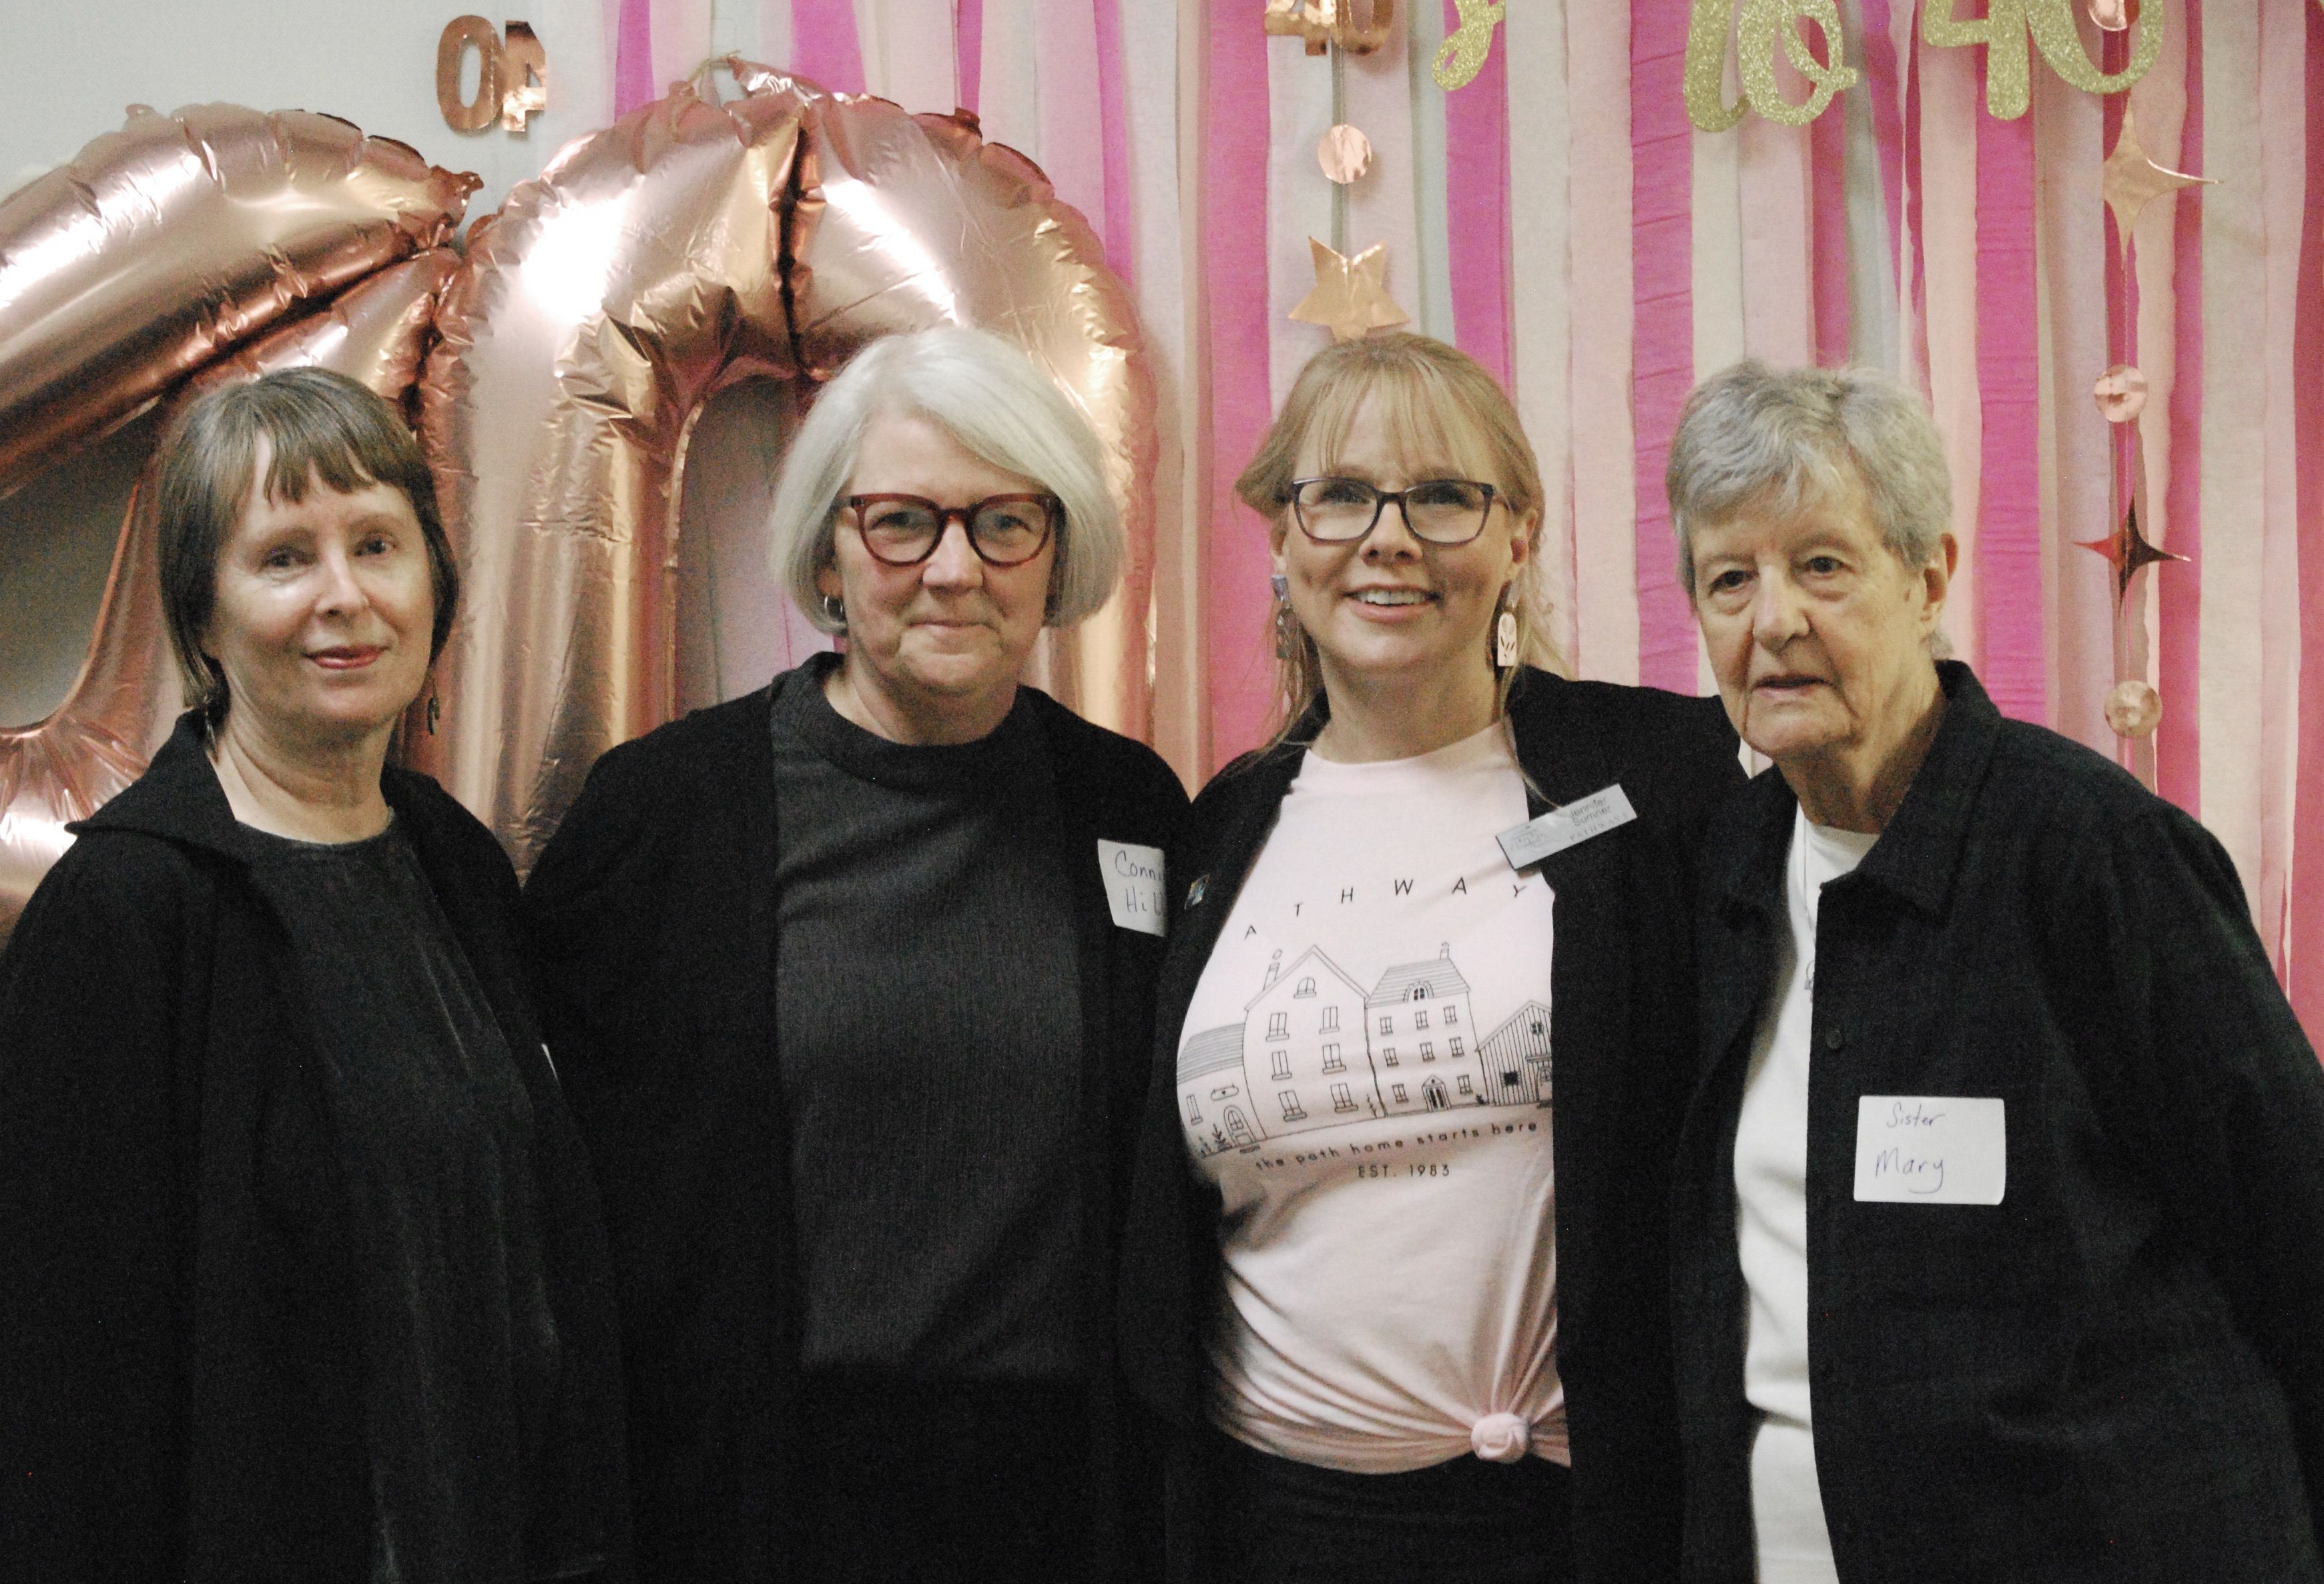 From left to right, Sharon Fenstermaker, Connie Hill, Jennifer Sumner, Sister Mary Robert Oliver